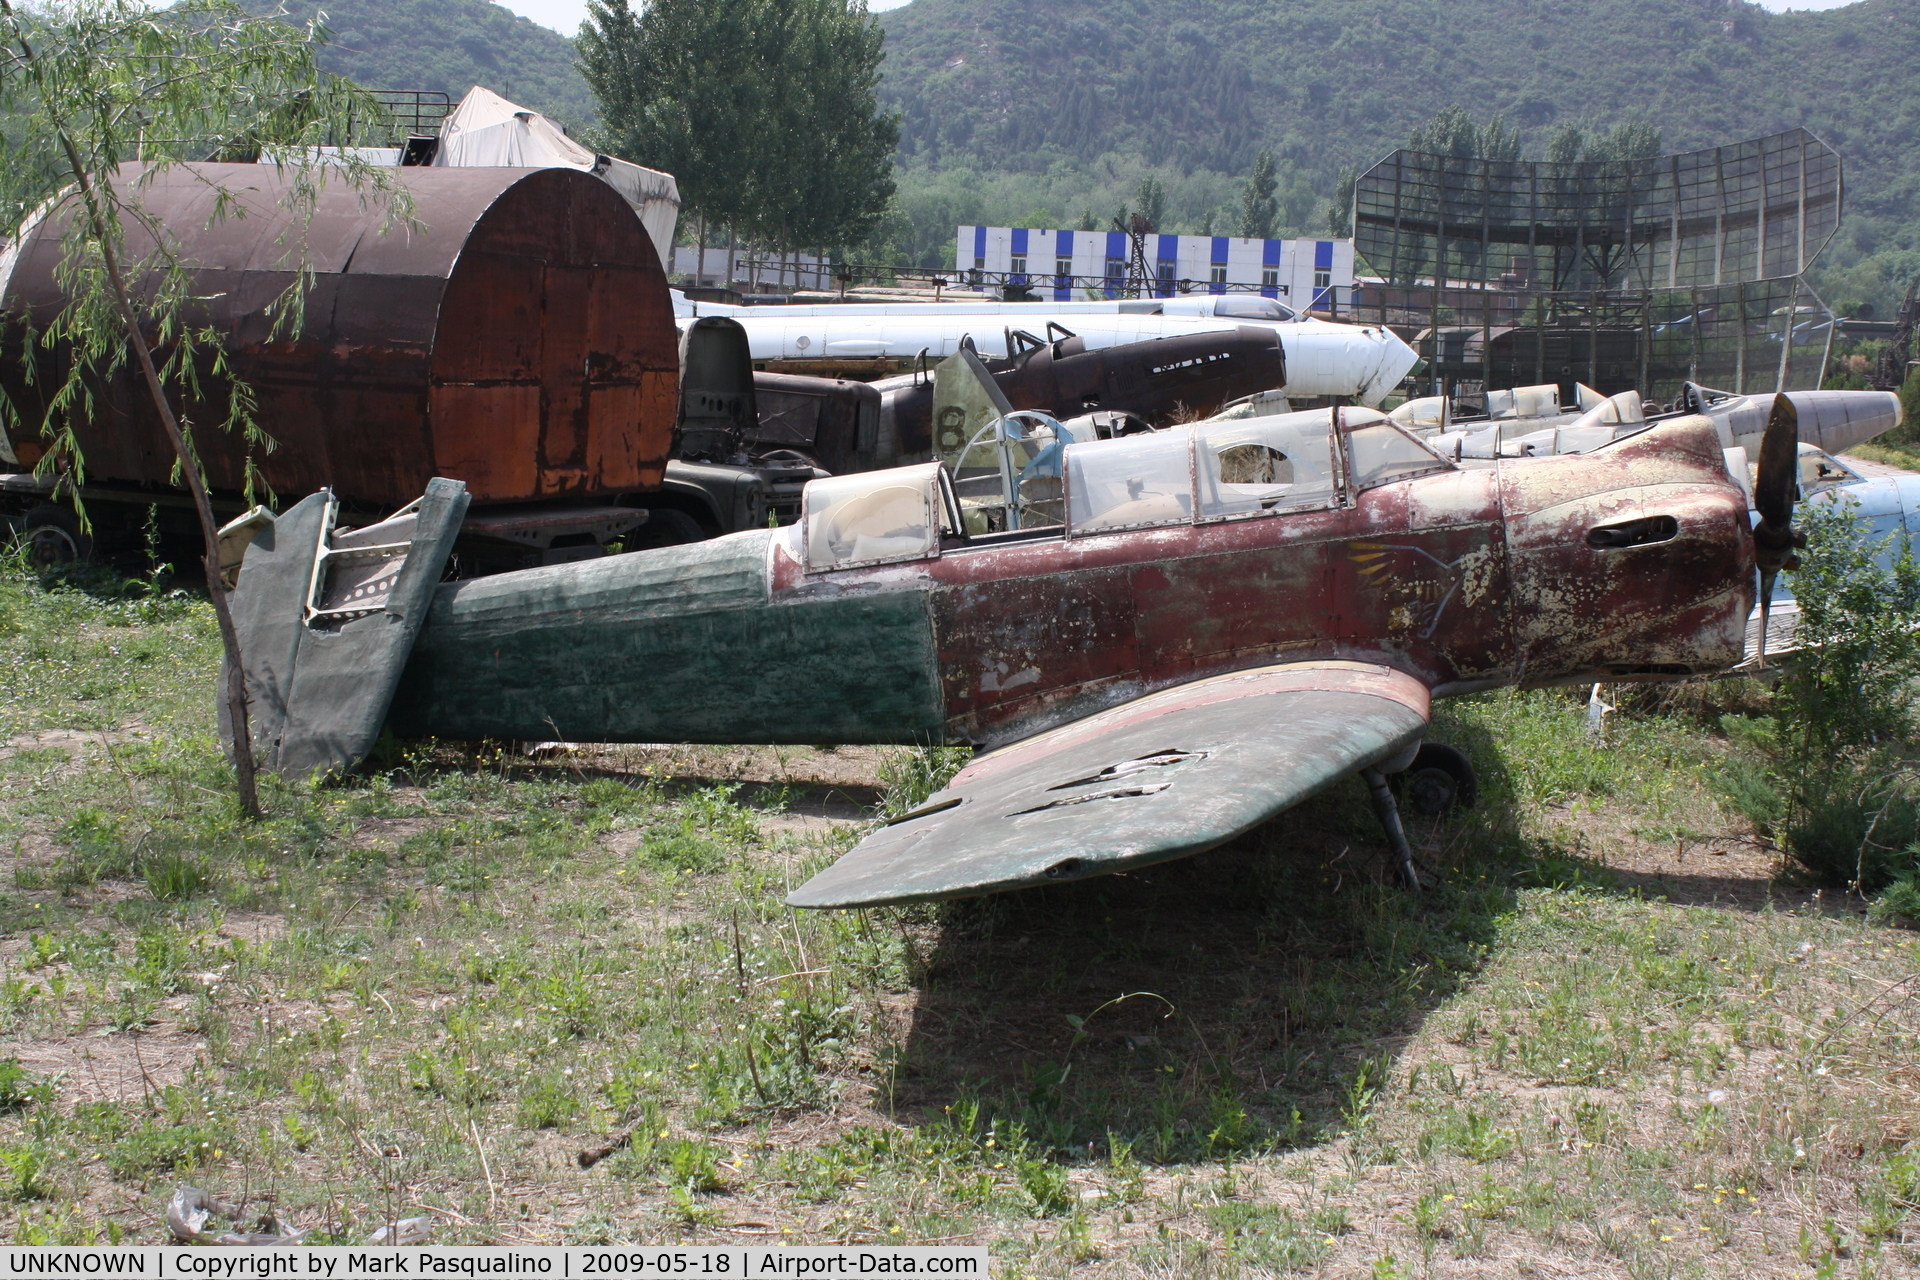 UNKNOWN, Miscellaneous Various C/N unknown, Nanchang CJ5  Located at Datangshan, China